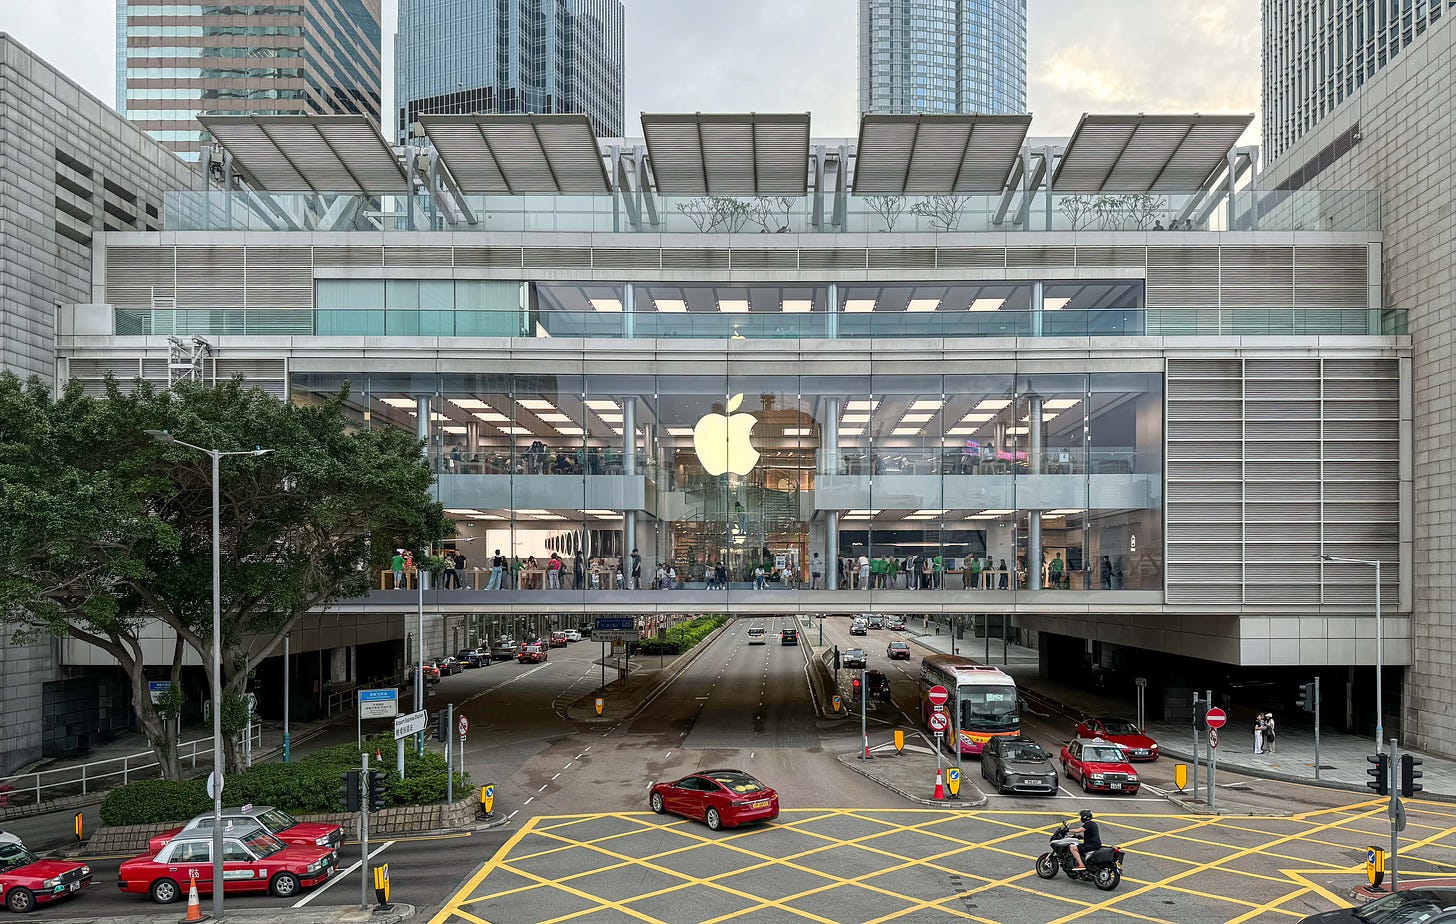 Apple ifc mall, pictured from the store's exterior. Cars and pedestrians cross the busy intersection below. Inside the store, an Apple Pickup counter has been added to the lowest level.